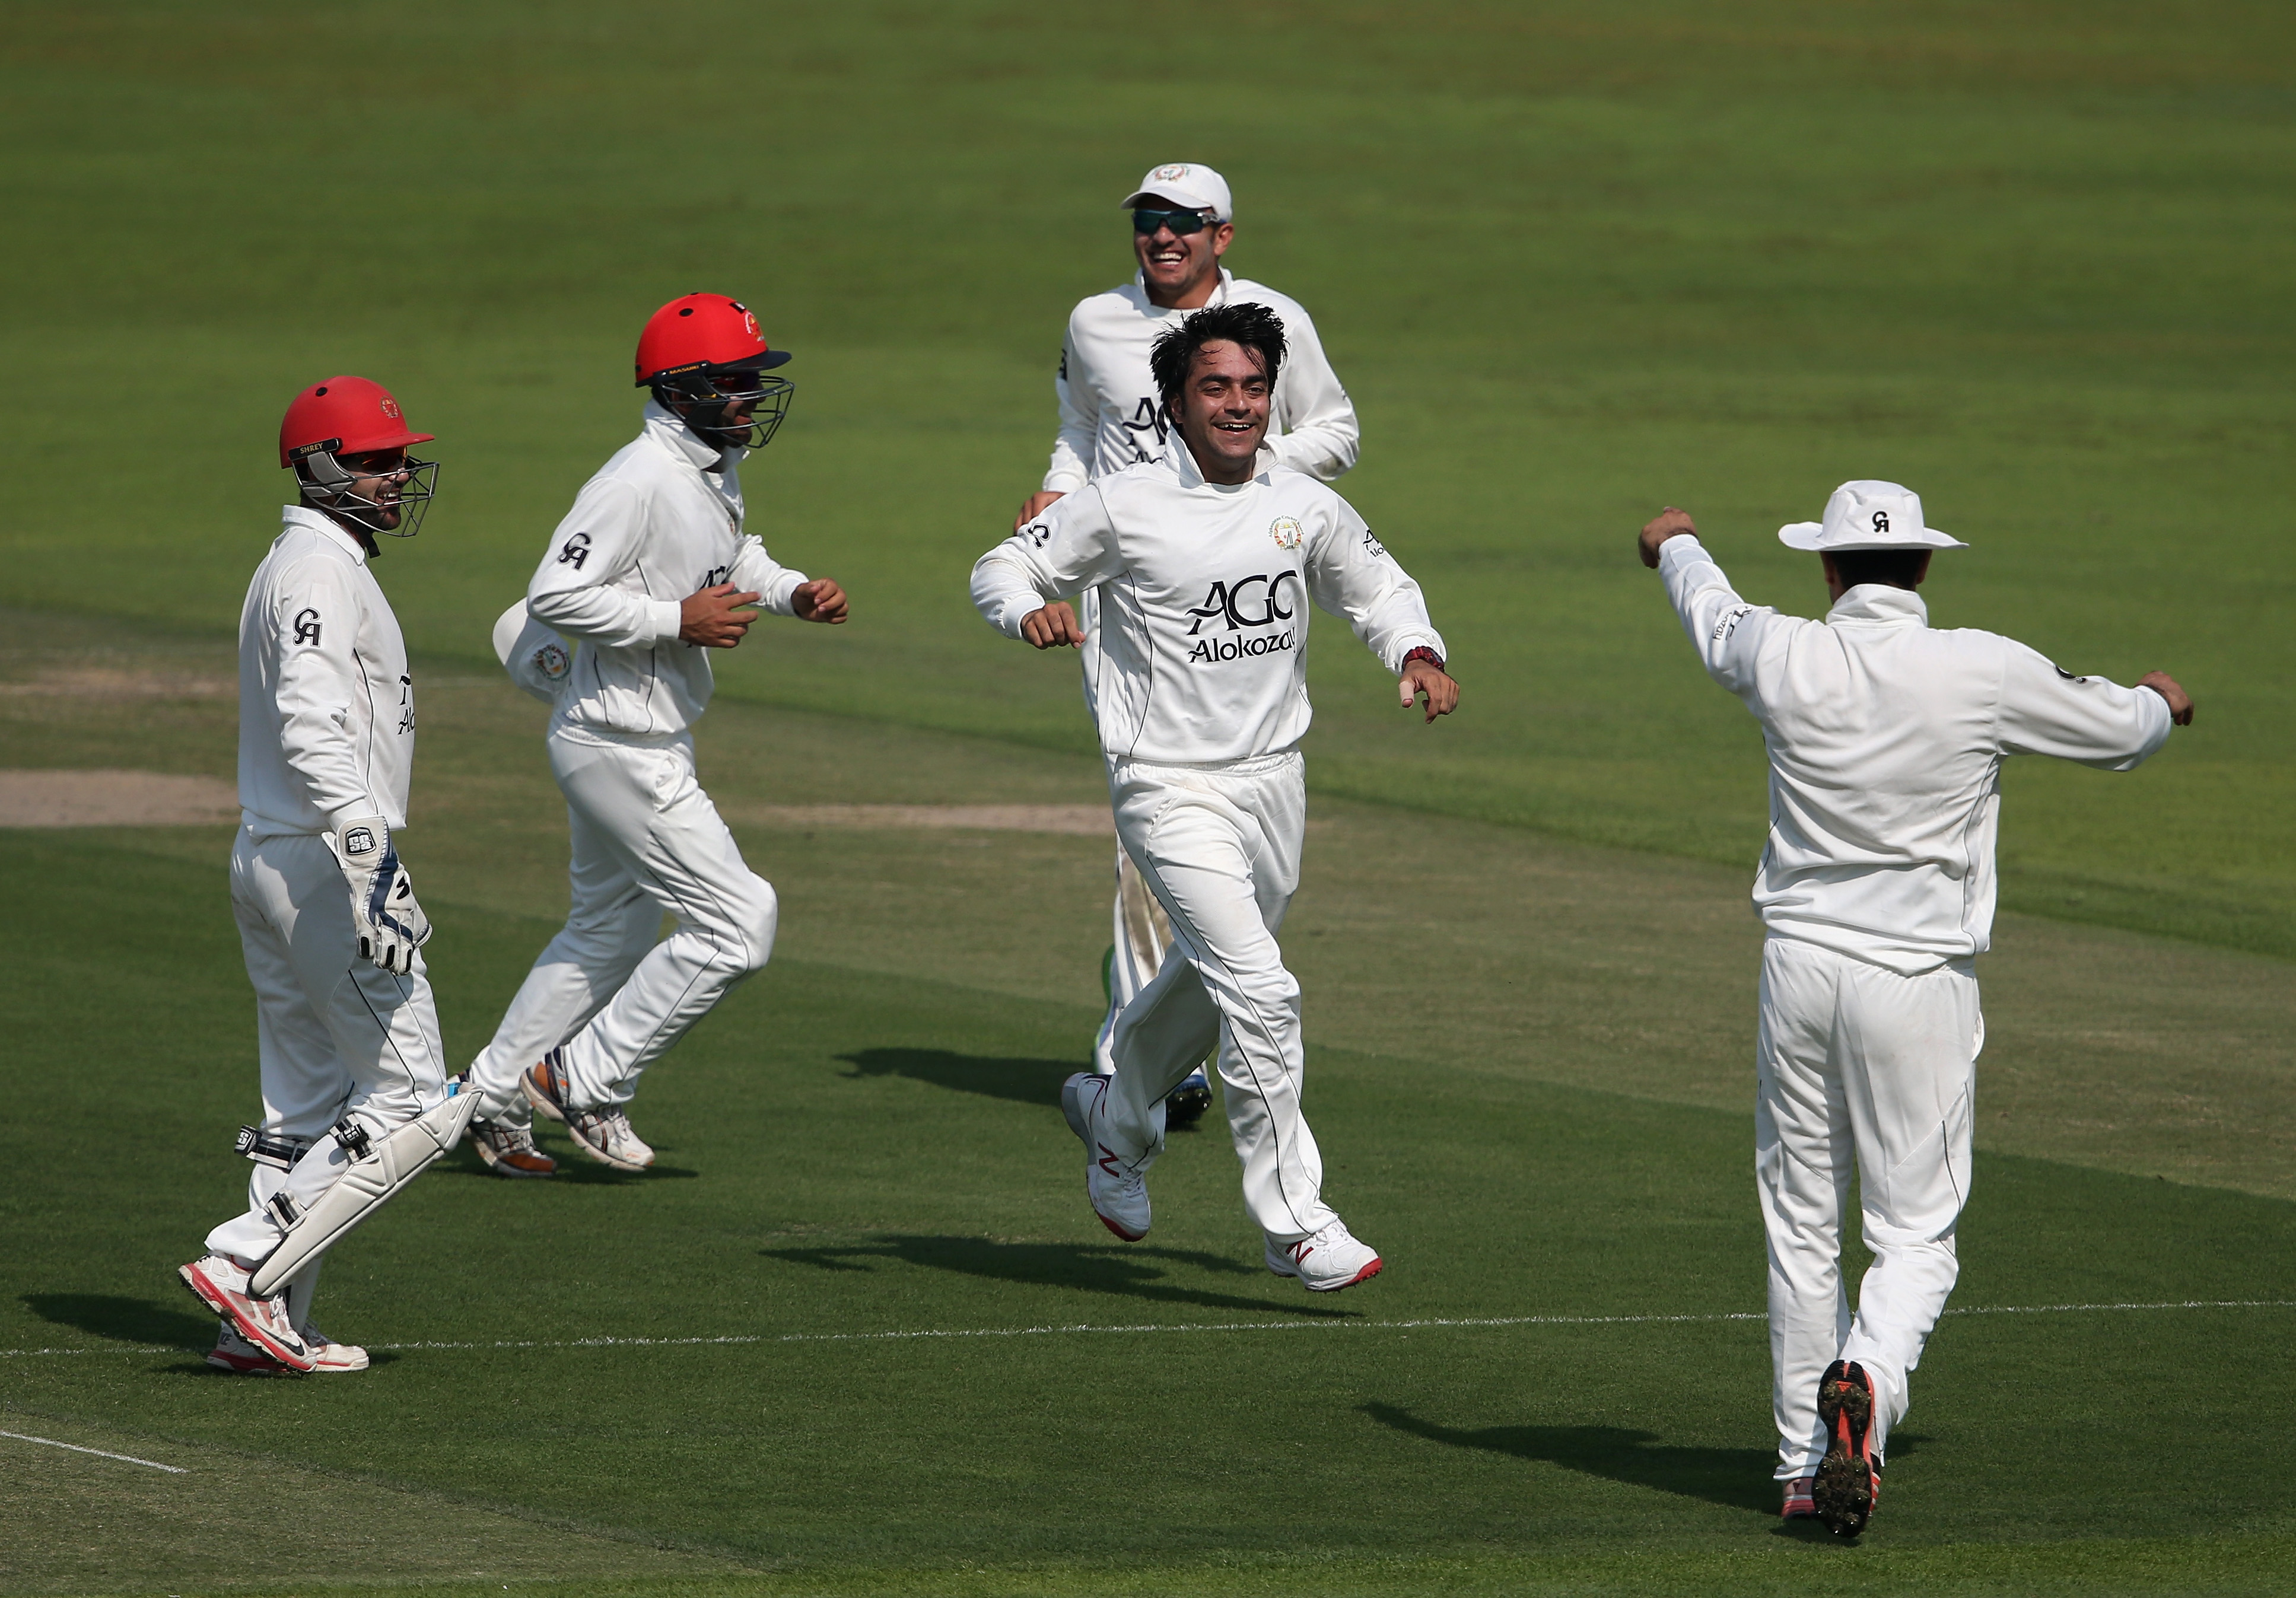 BAN v AFG | The more Test cricket we play, the better we will be, says Rashid Khan